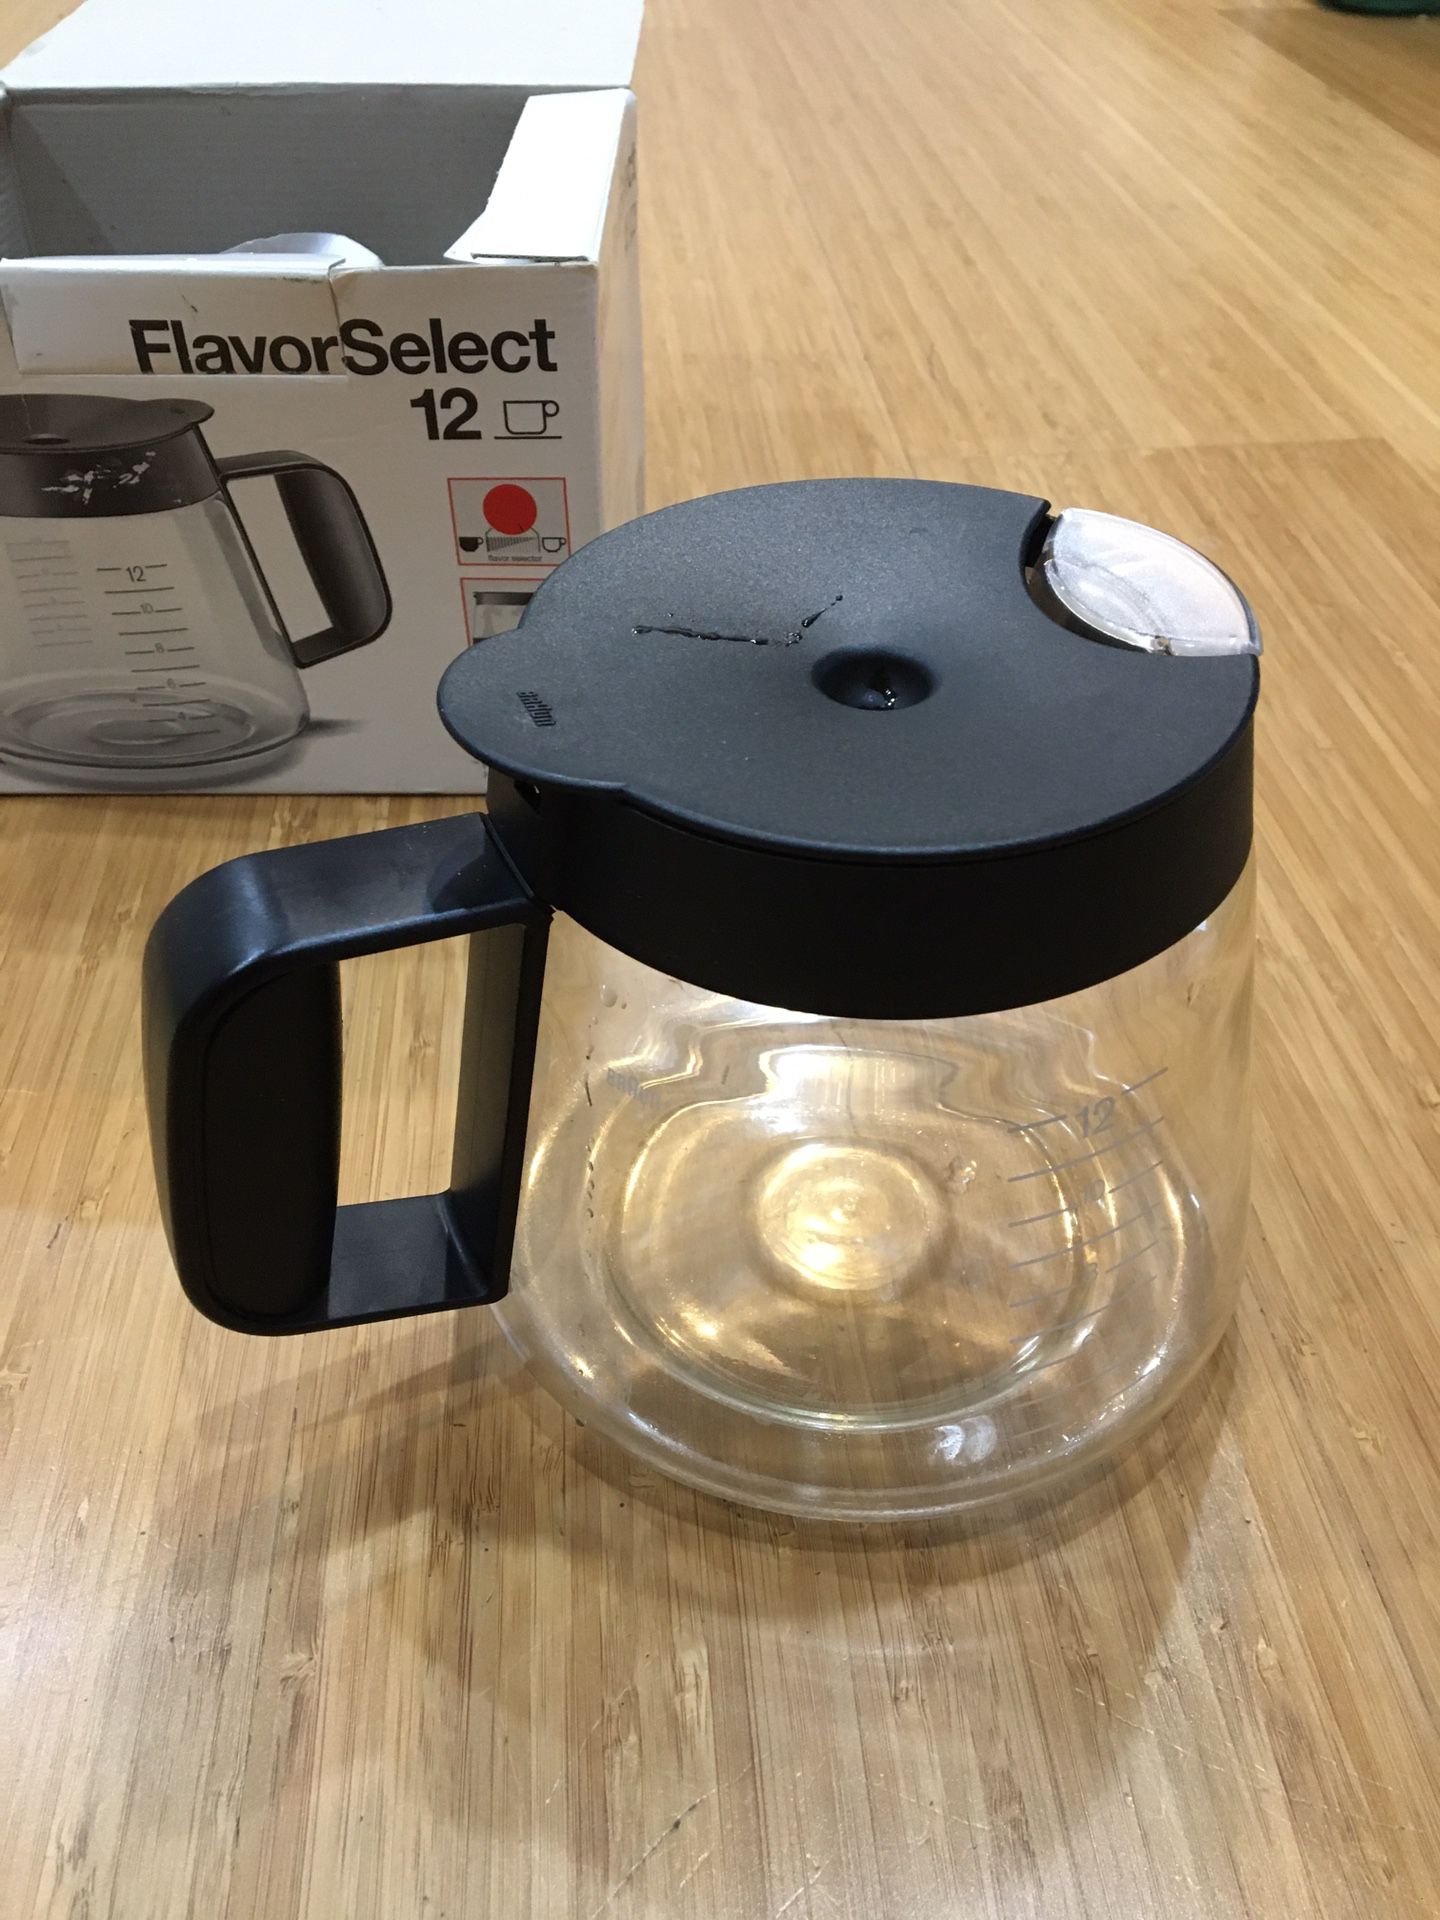 Braun 12cup Flavor Select coffee maker replacement carafe.